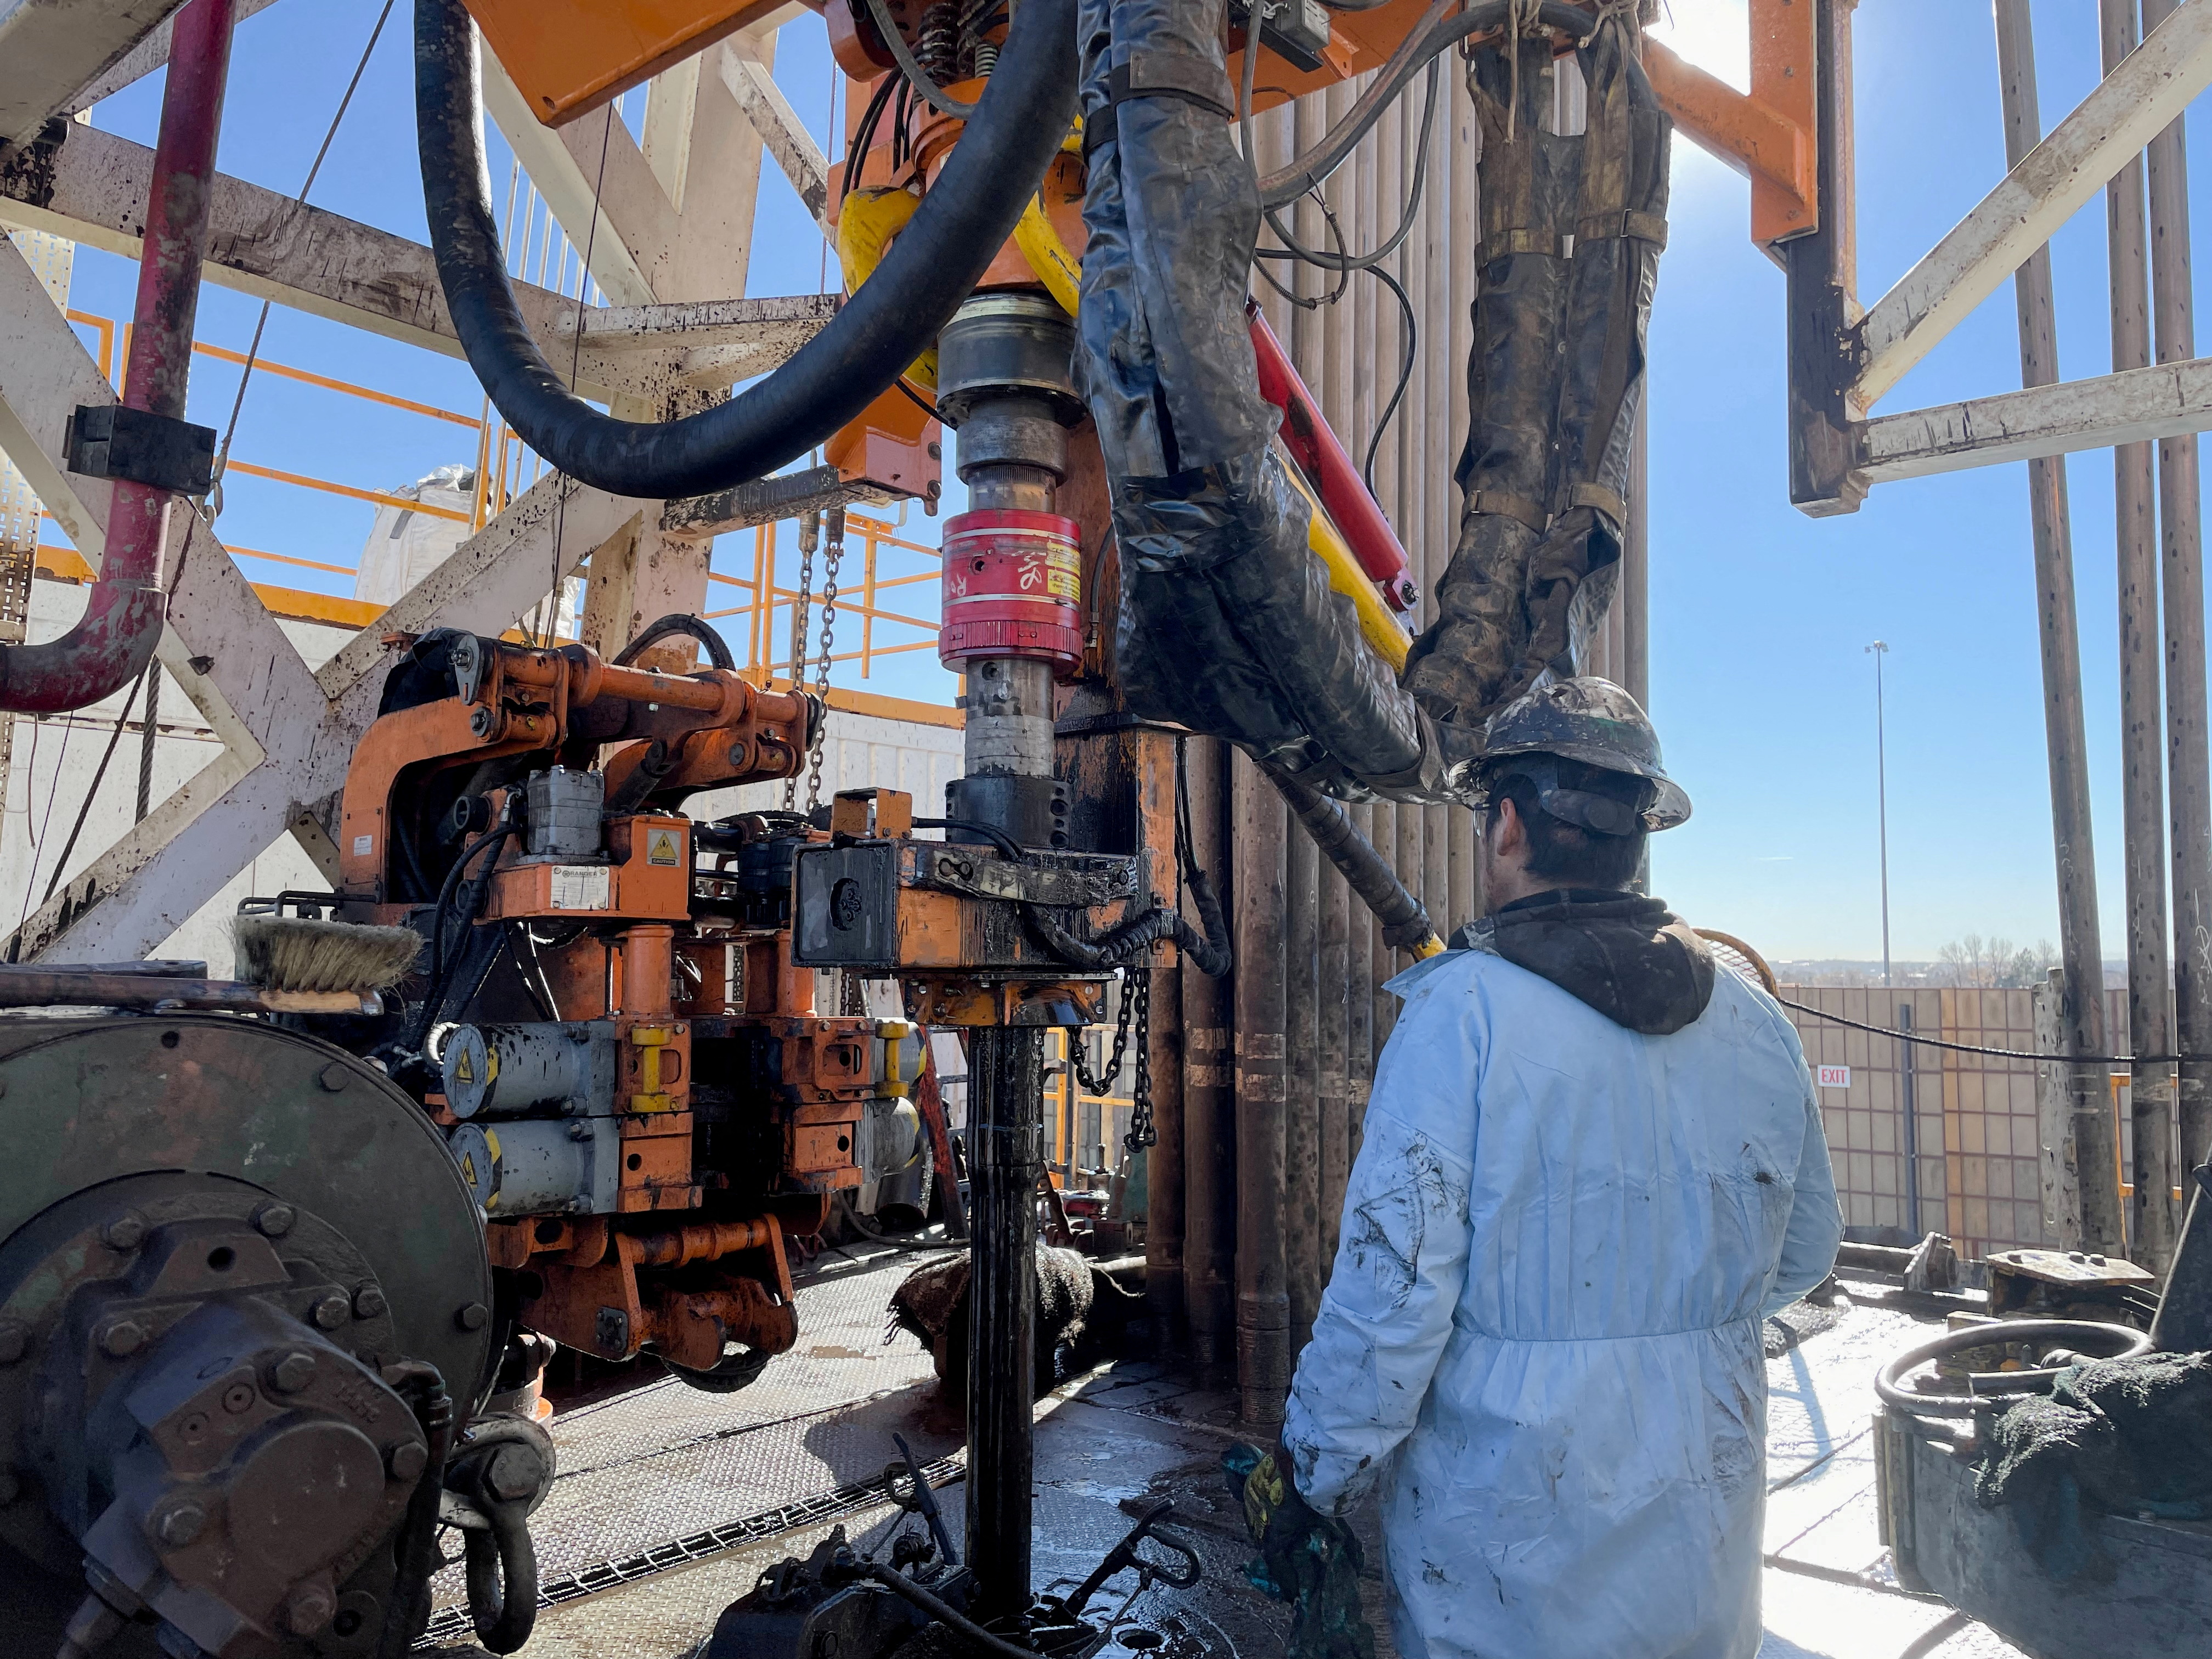 A rig hand works on an electric drilling rig for oil producer Civitas Resources, at the Denver suburbs, in Broomfield